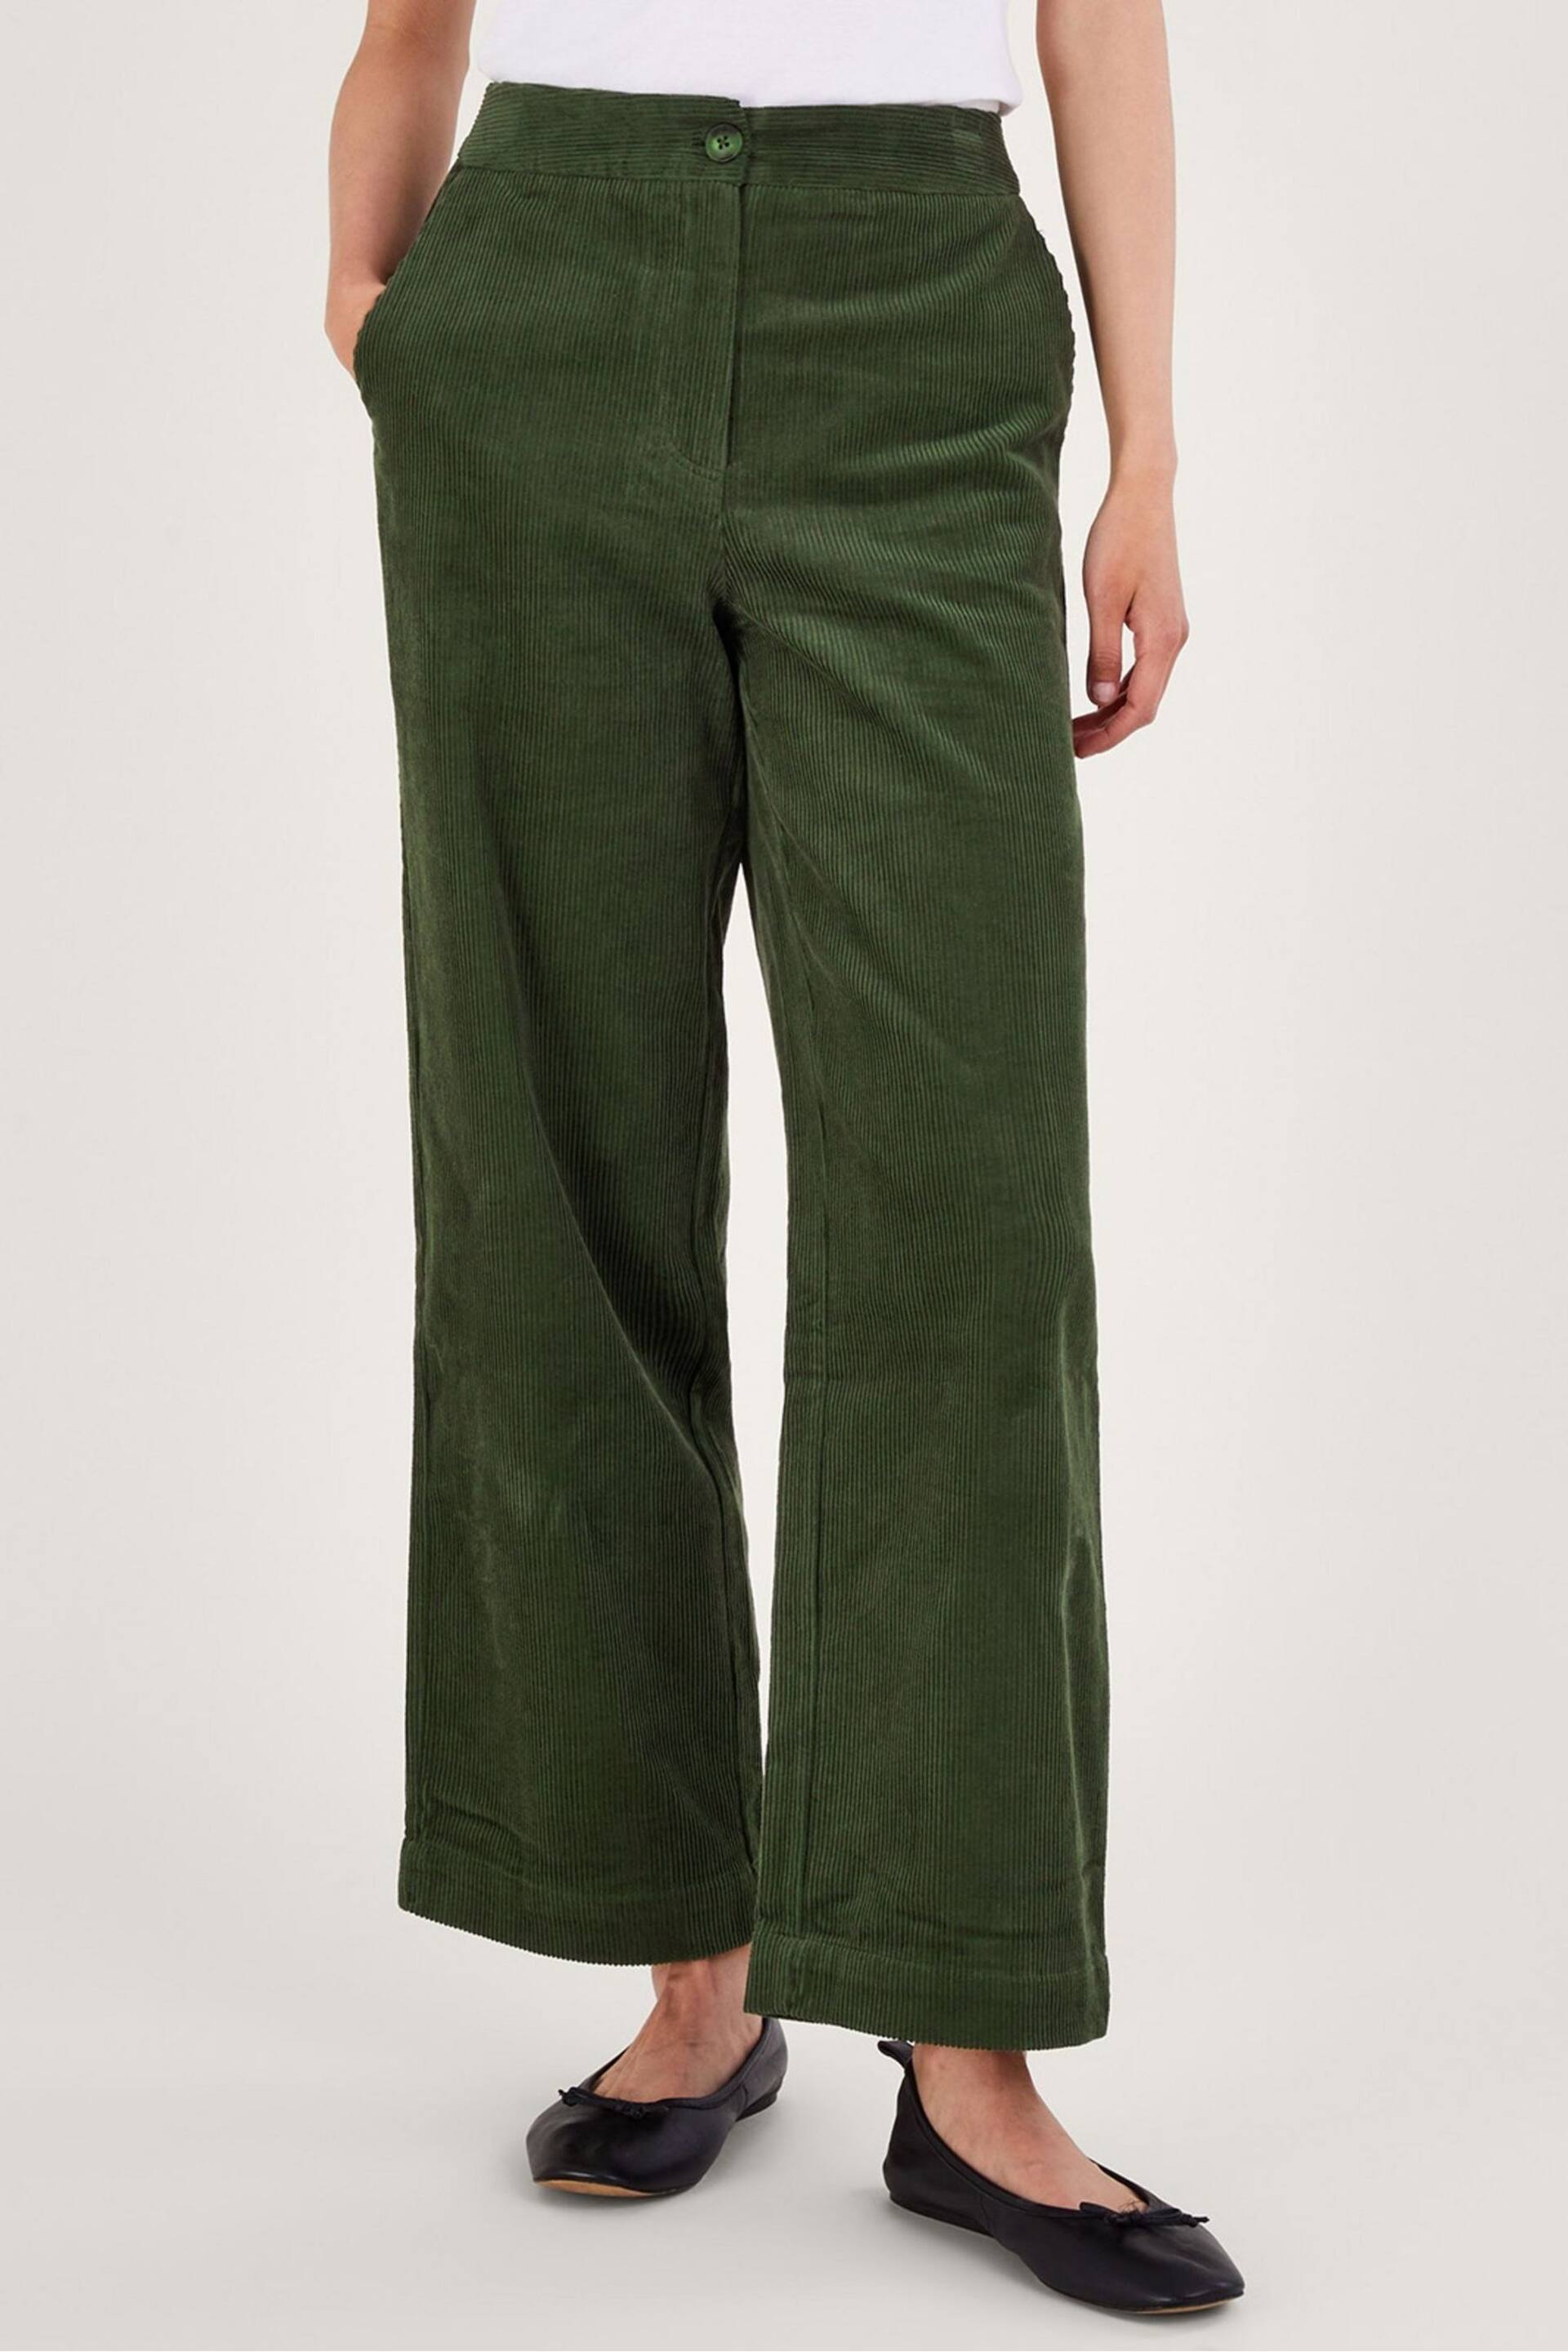 Monsoon Green Cord Wide Leg Trousers - Image 1 of 4